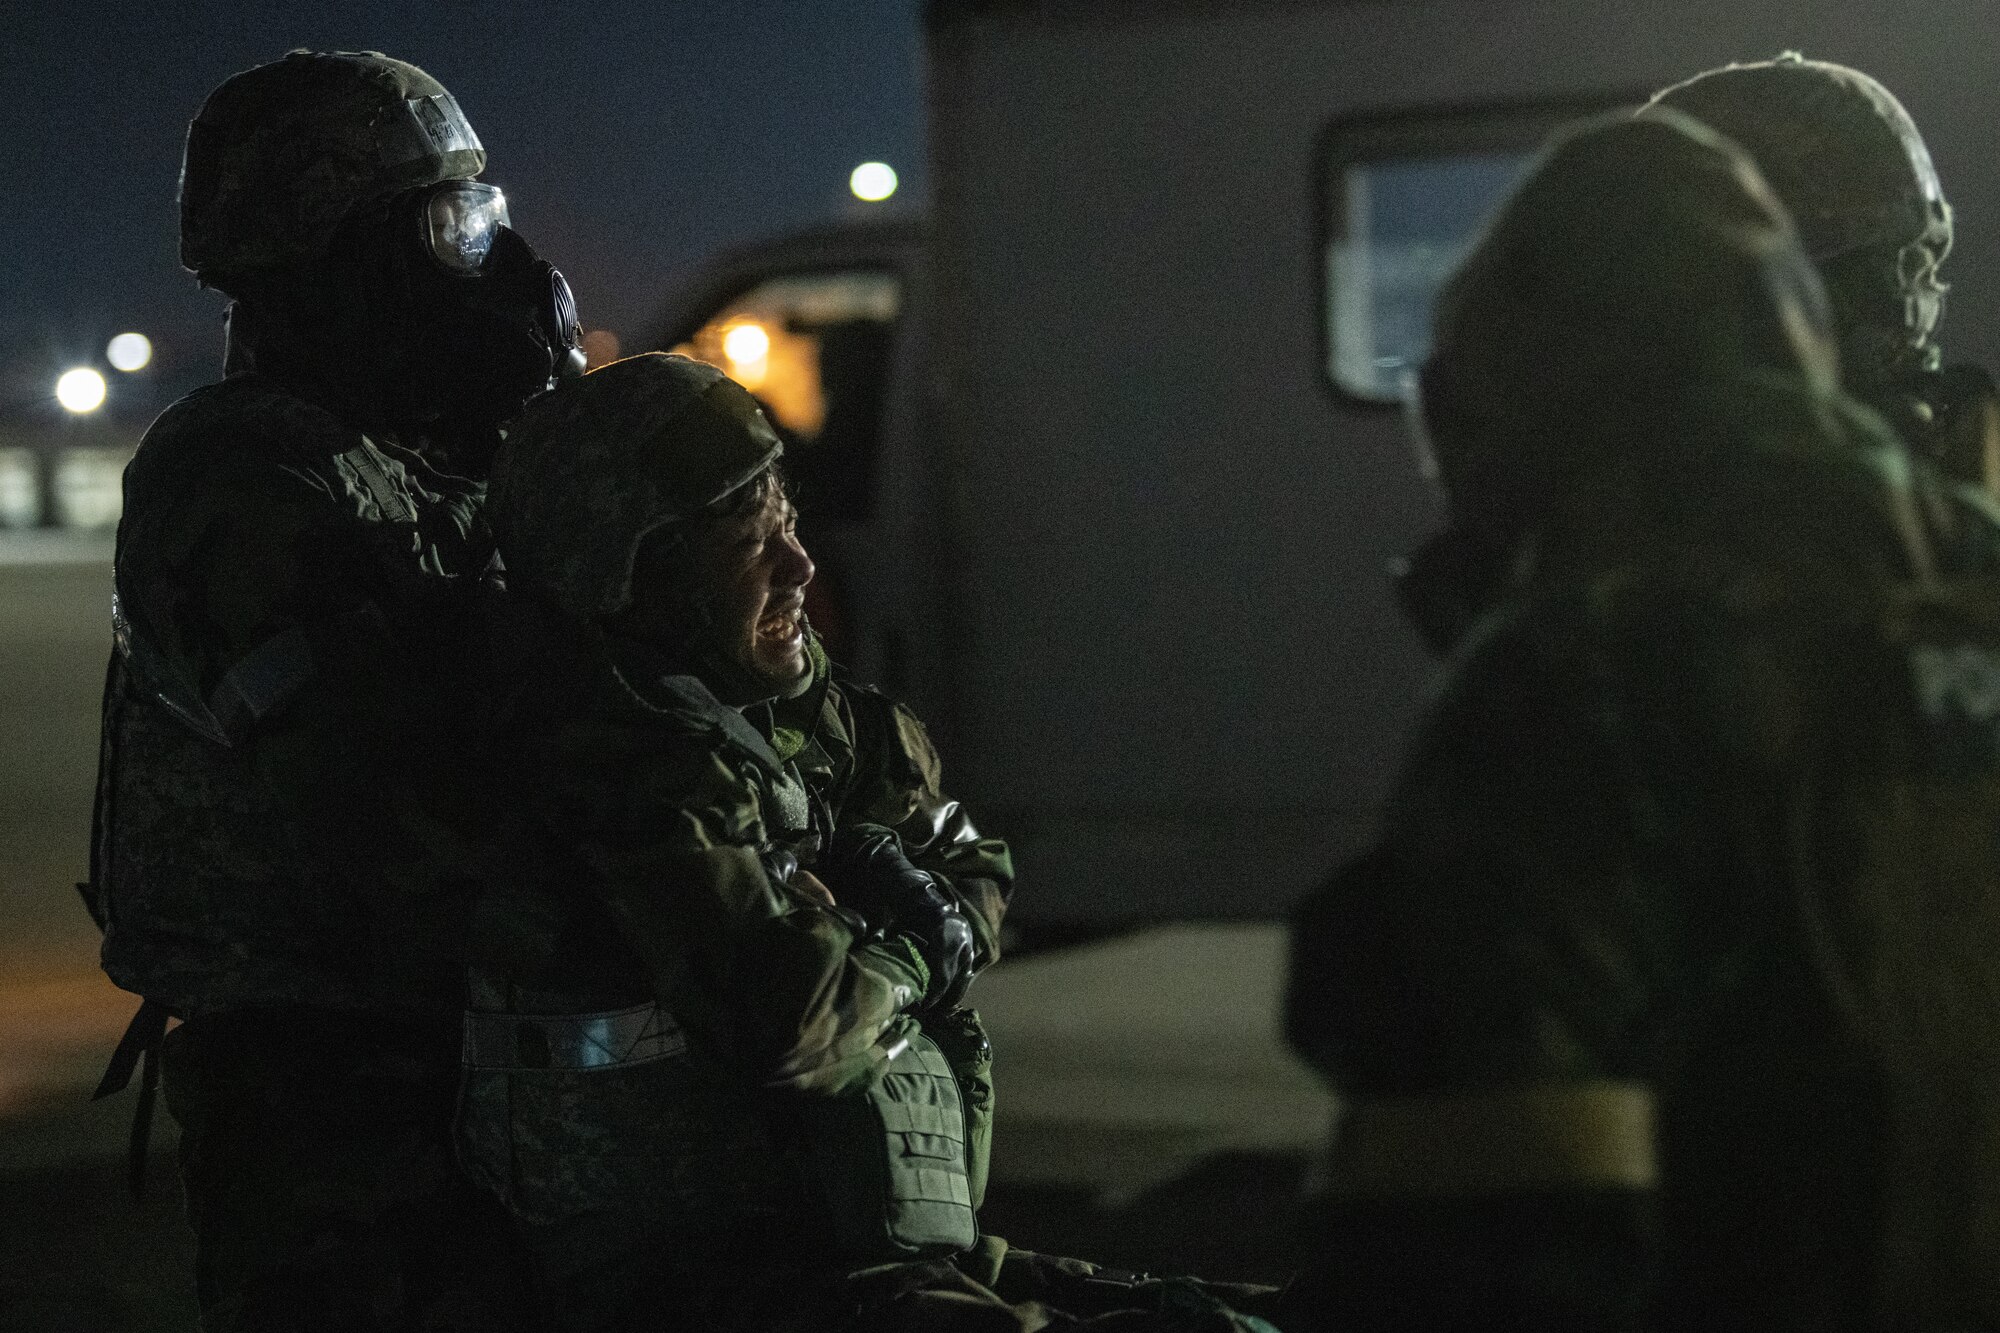 nighttime on the flightline as three airmen fireman carry a fourth to safety